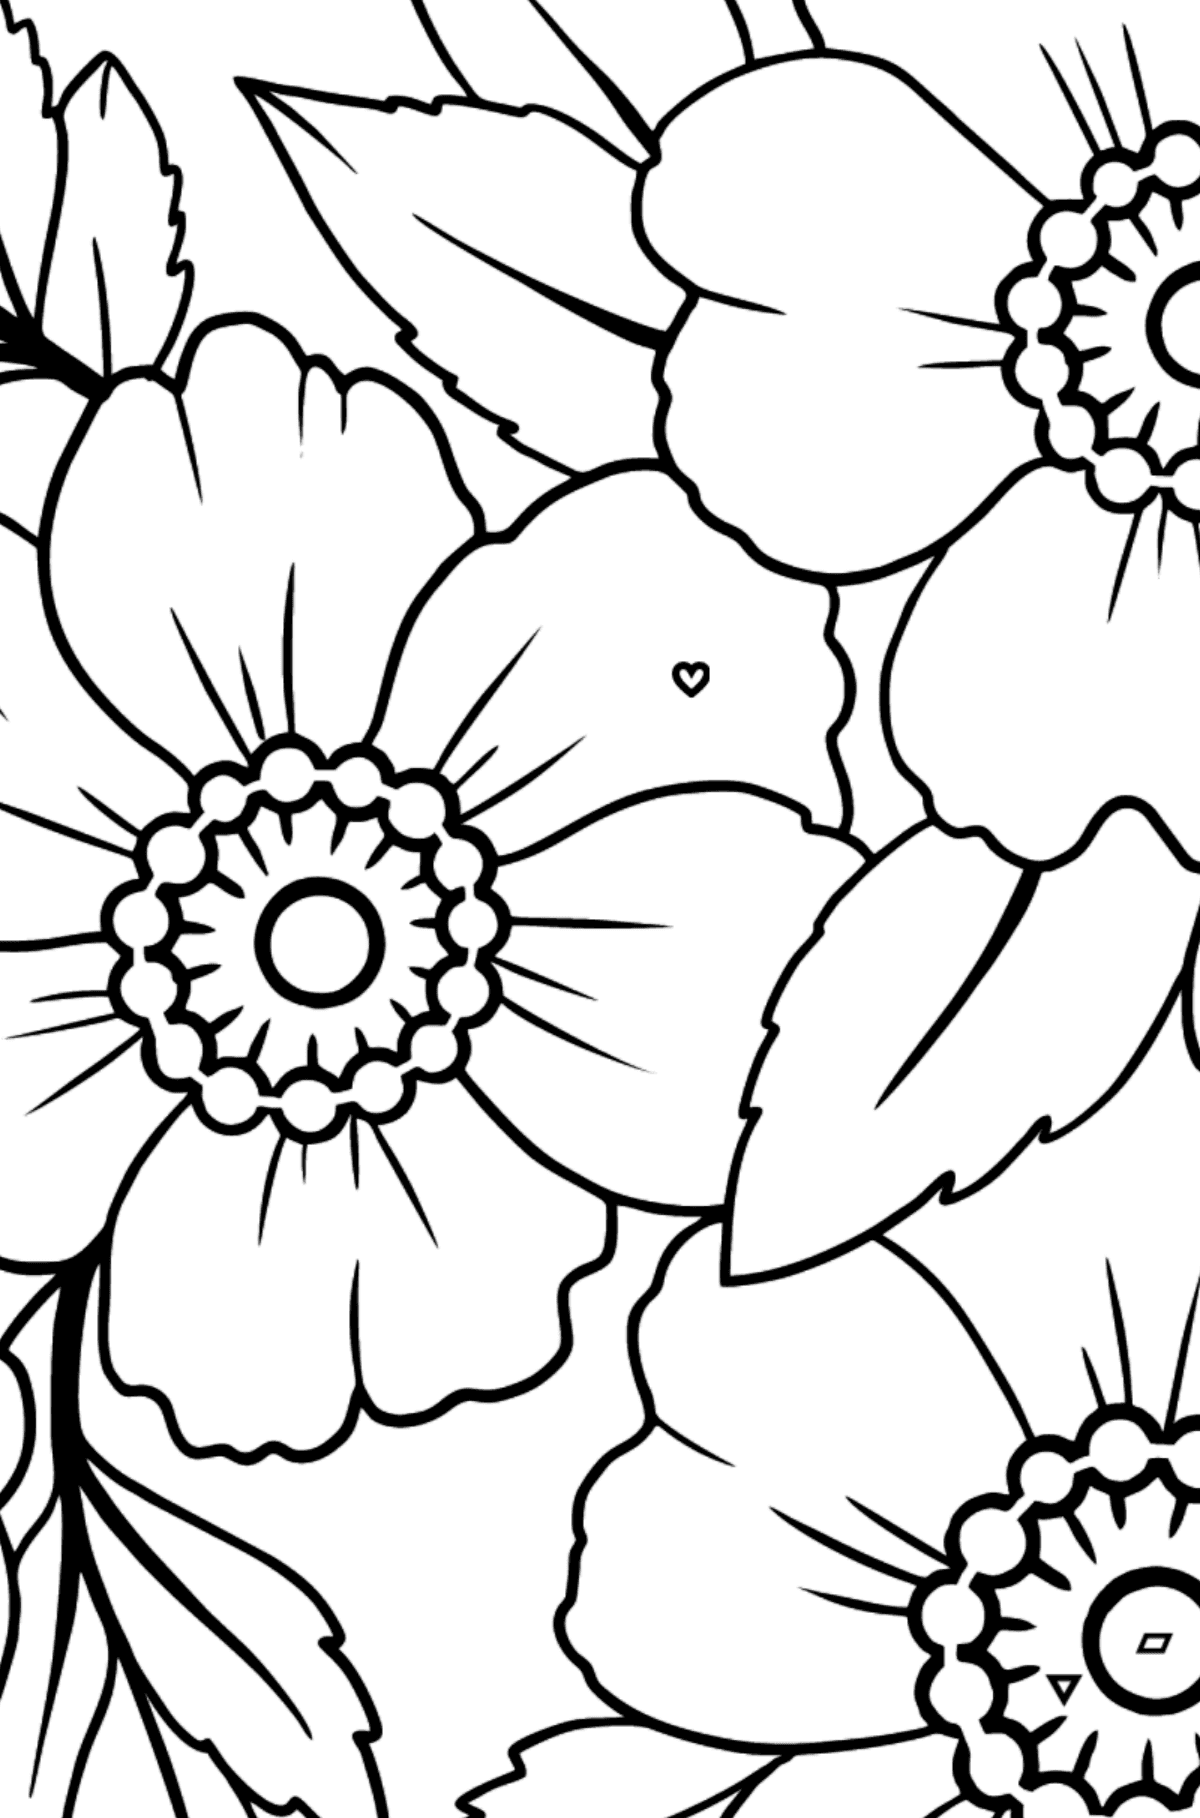 Flower Coloring Page - Japanese Velvet Anemone - Coloring by Symbols and Geometric Shapes for Kids